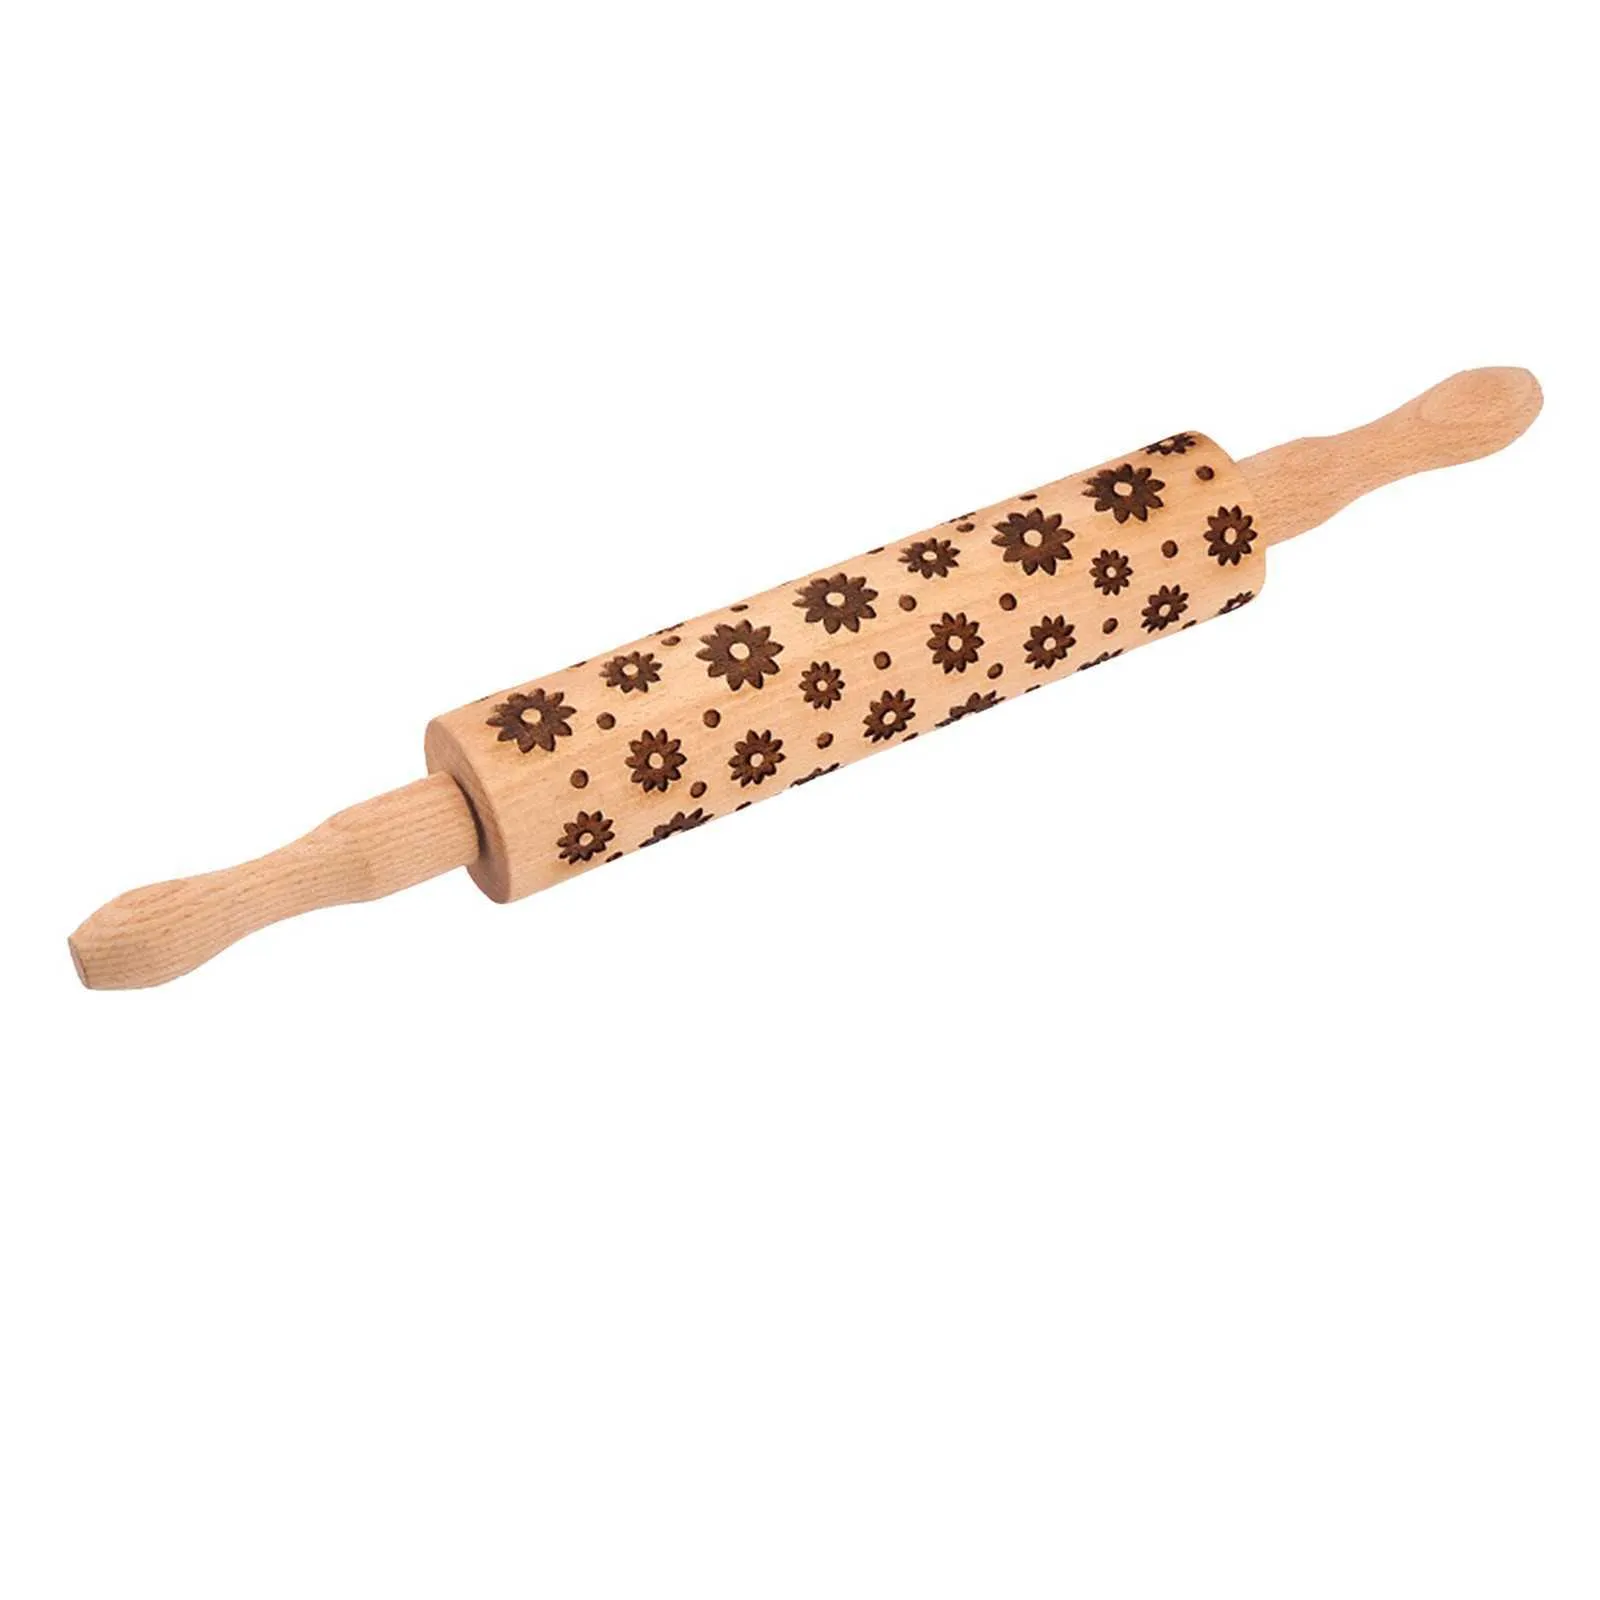 Creative Pattern Rolling Pin Wooden Household Baking Embossed Engraving Pin Home Kitchen Noodles Bread Making Tool 211008